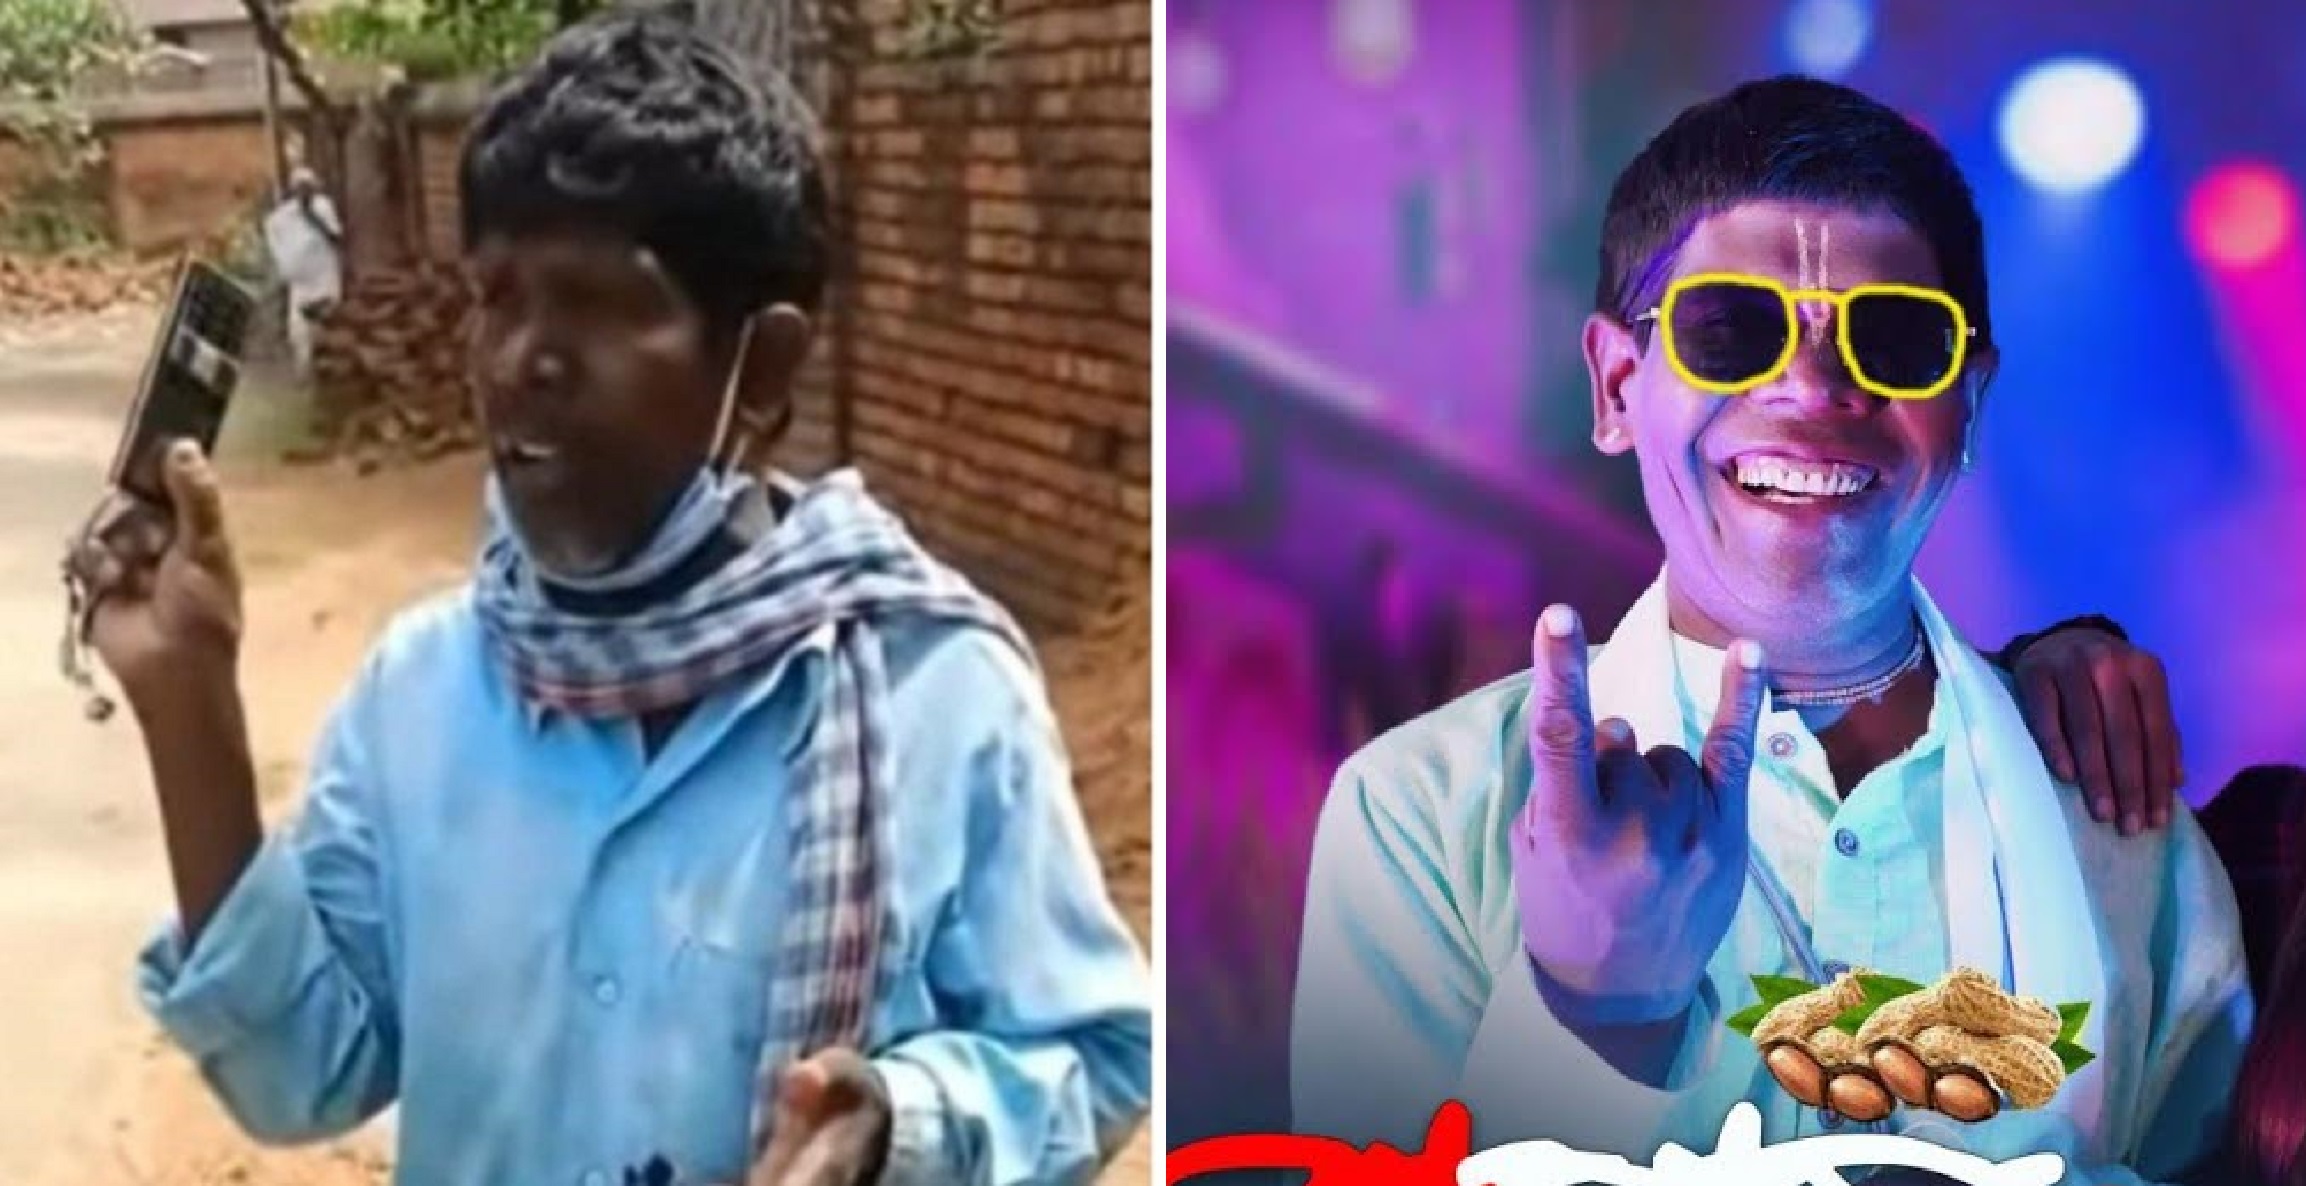 ‘Kacha Badam’ Singer Gets Long-Overdue Remuneration For Viral Hit Song, Gets Rs 3 Lakhs From Music Label